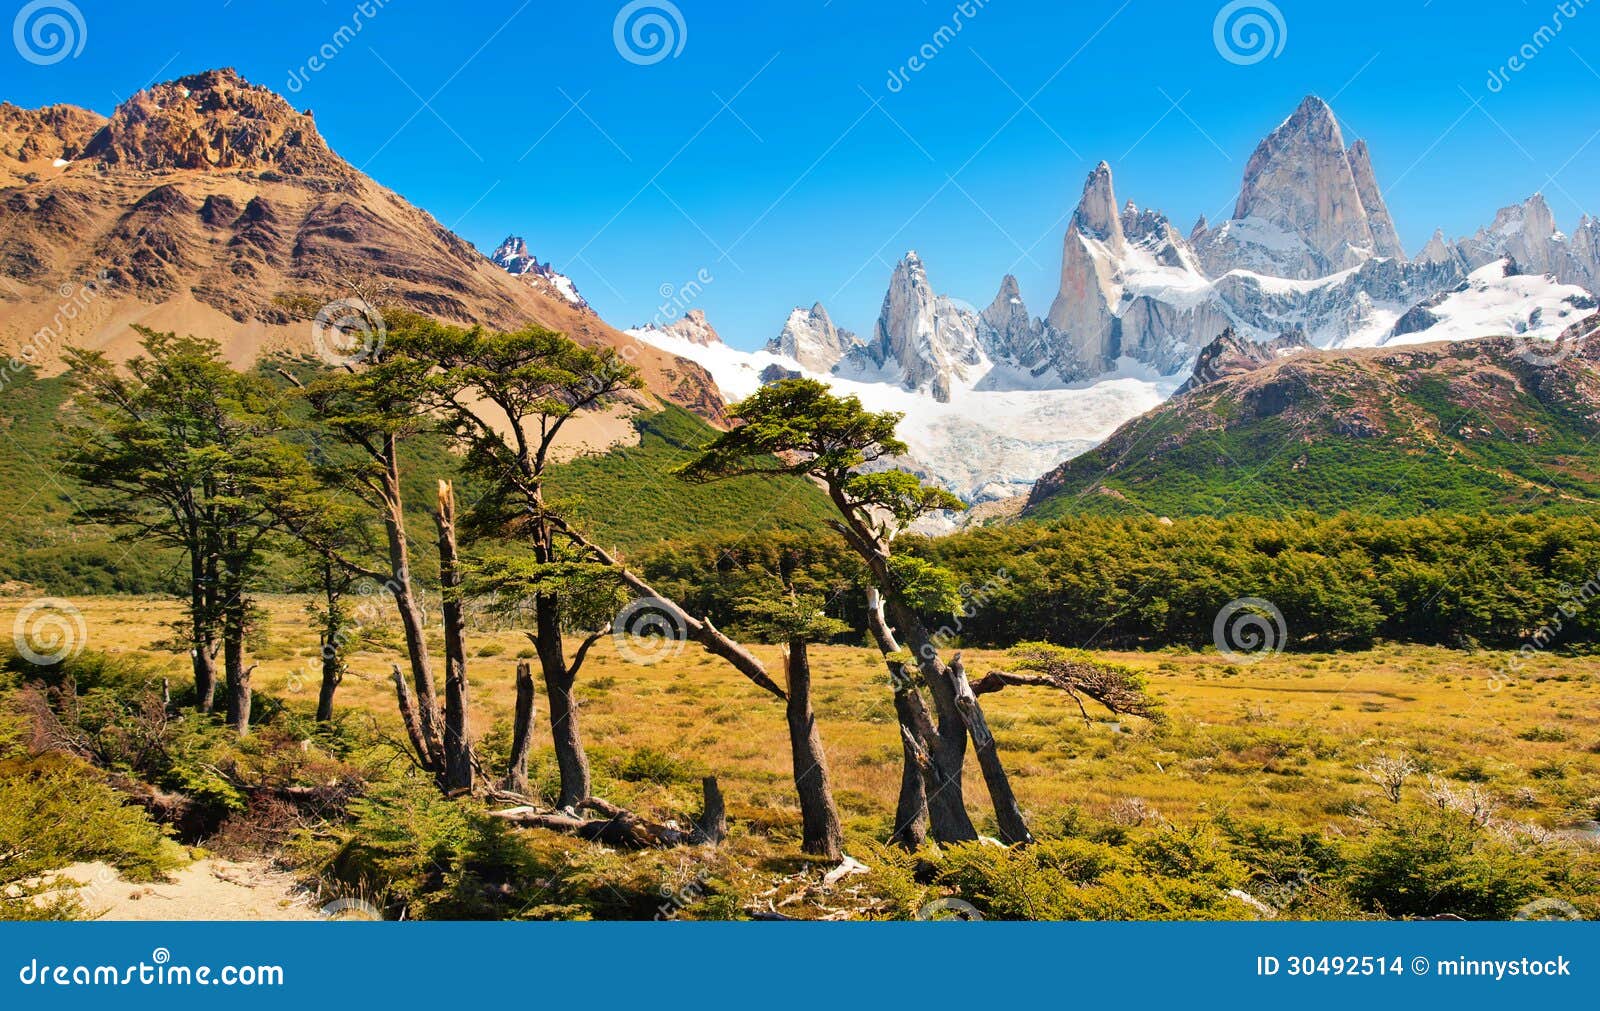 beautiful landscape with mt fitz roy in los glaciares national park, patagonia, argentina, south america